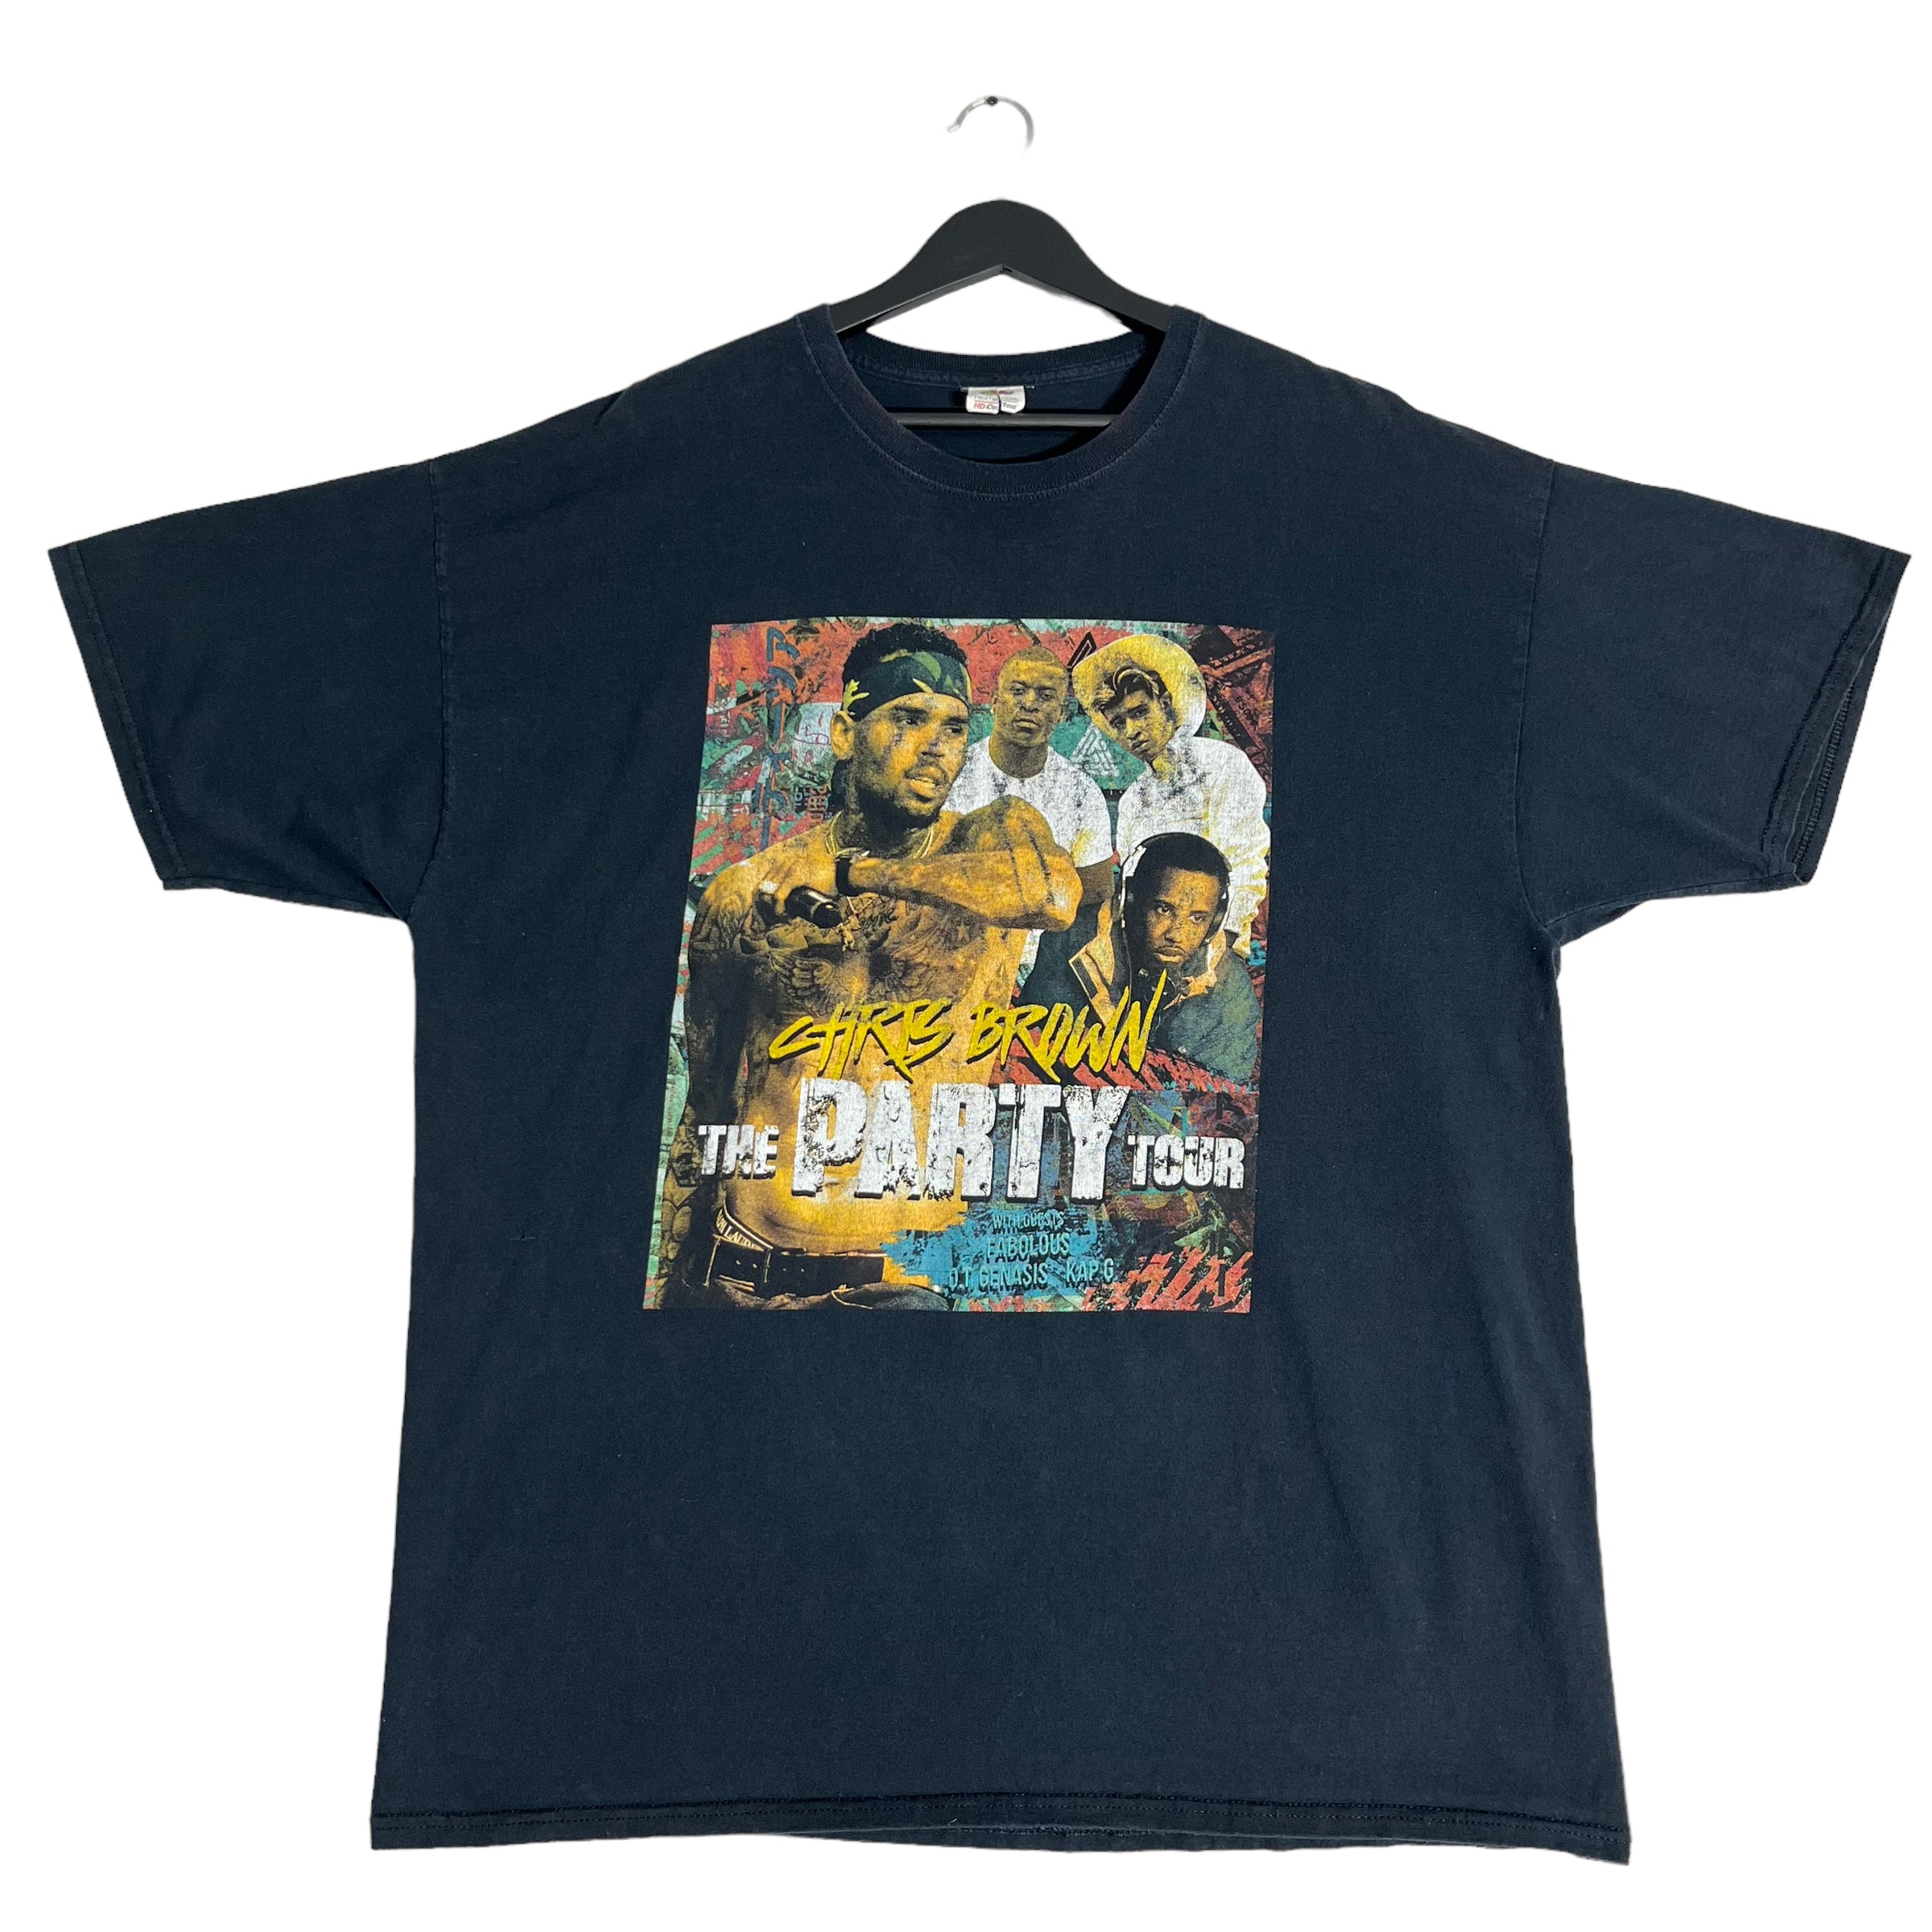 The Chris Brown Party Tour Tee